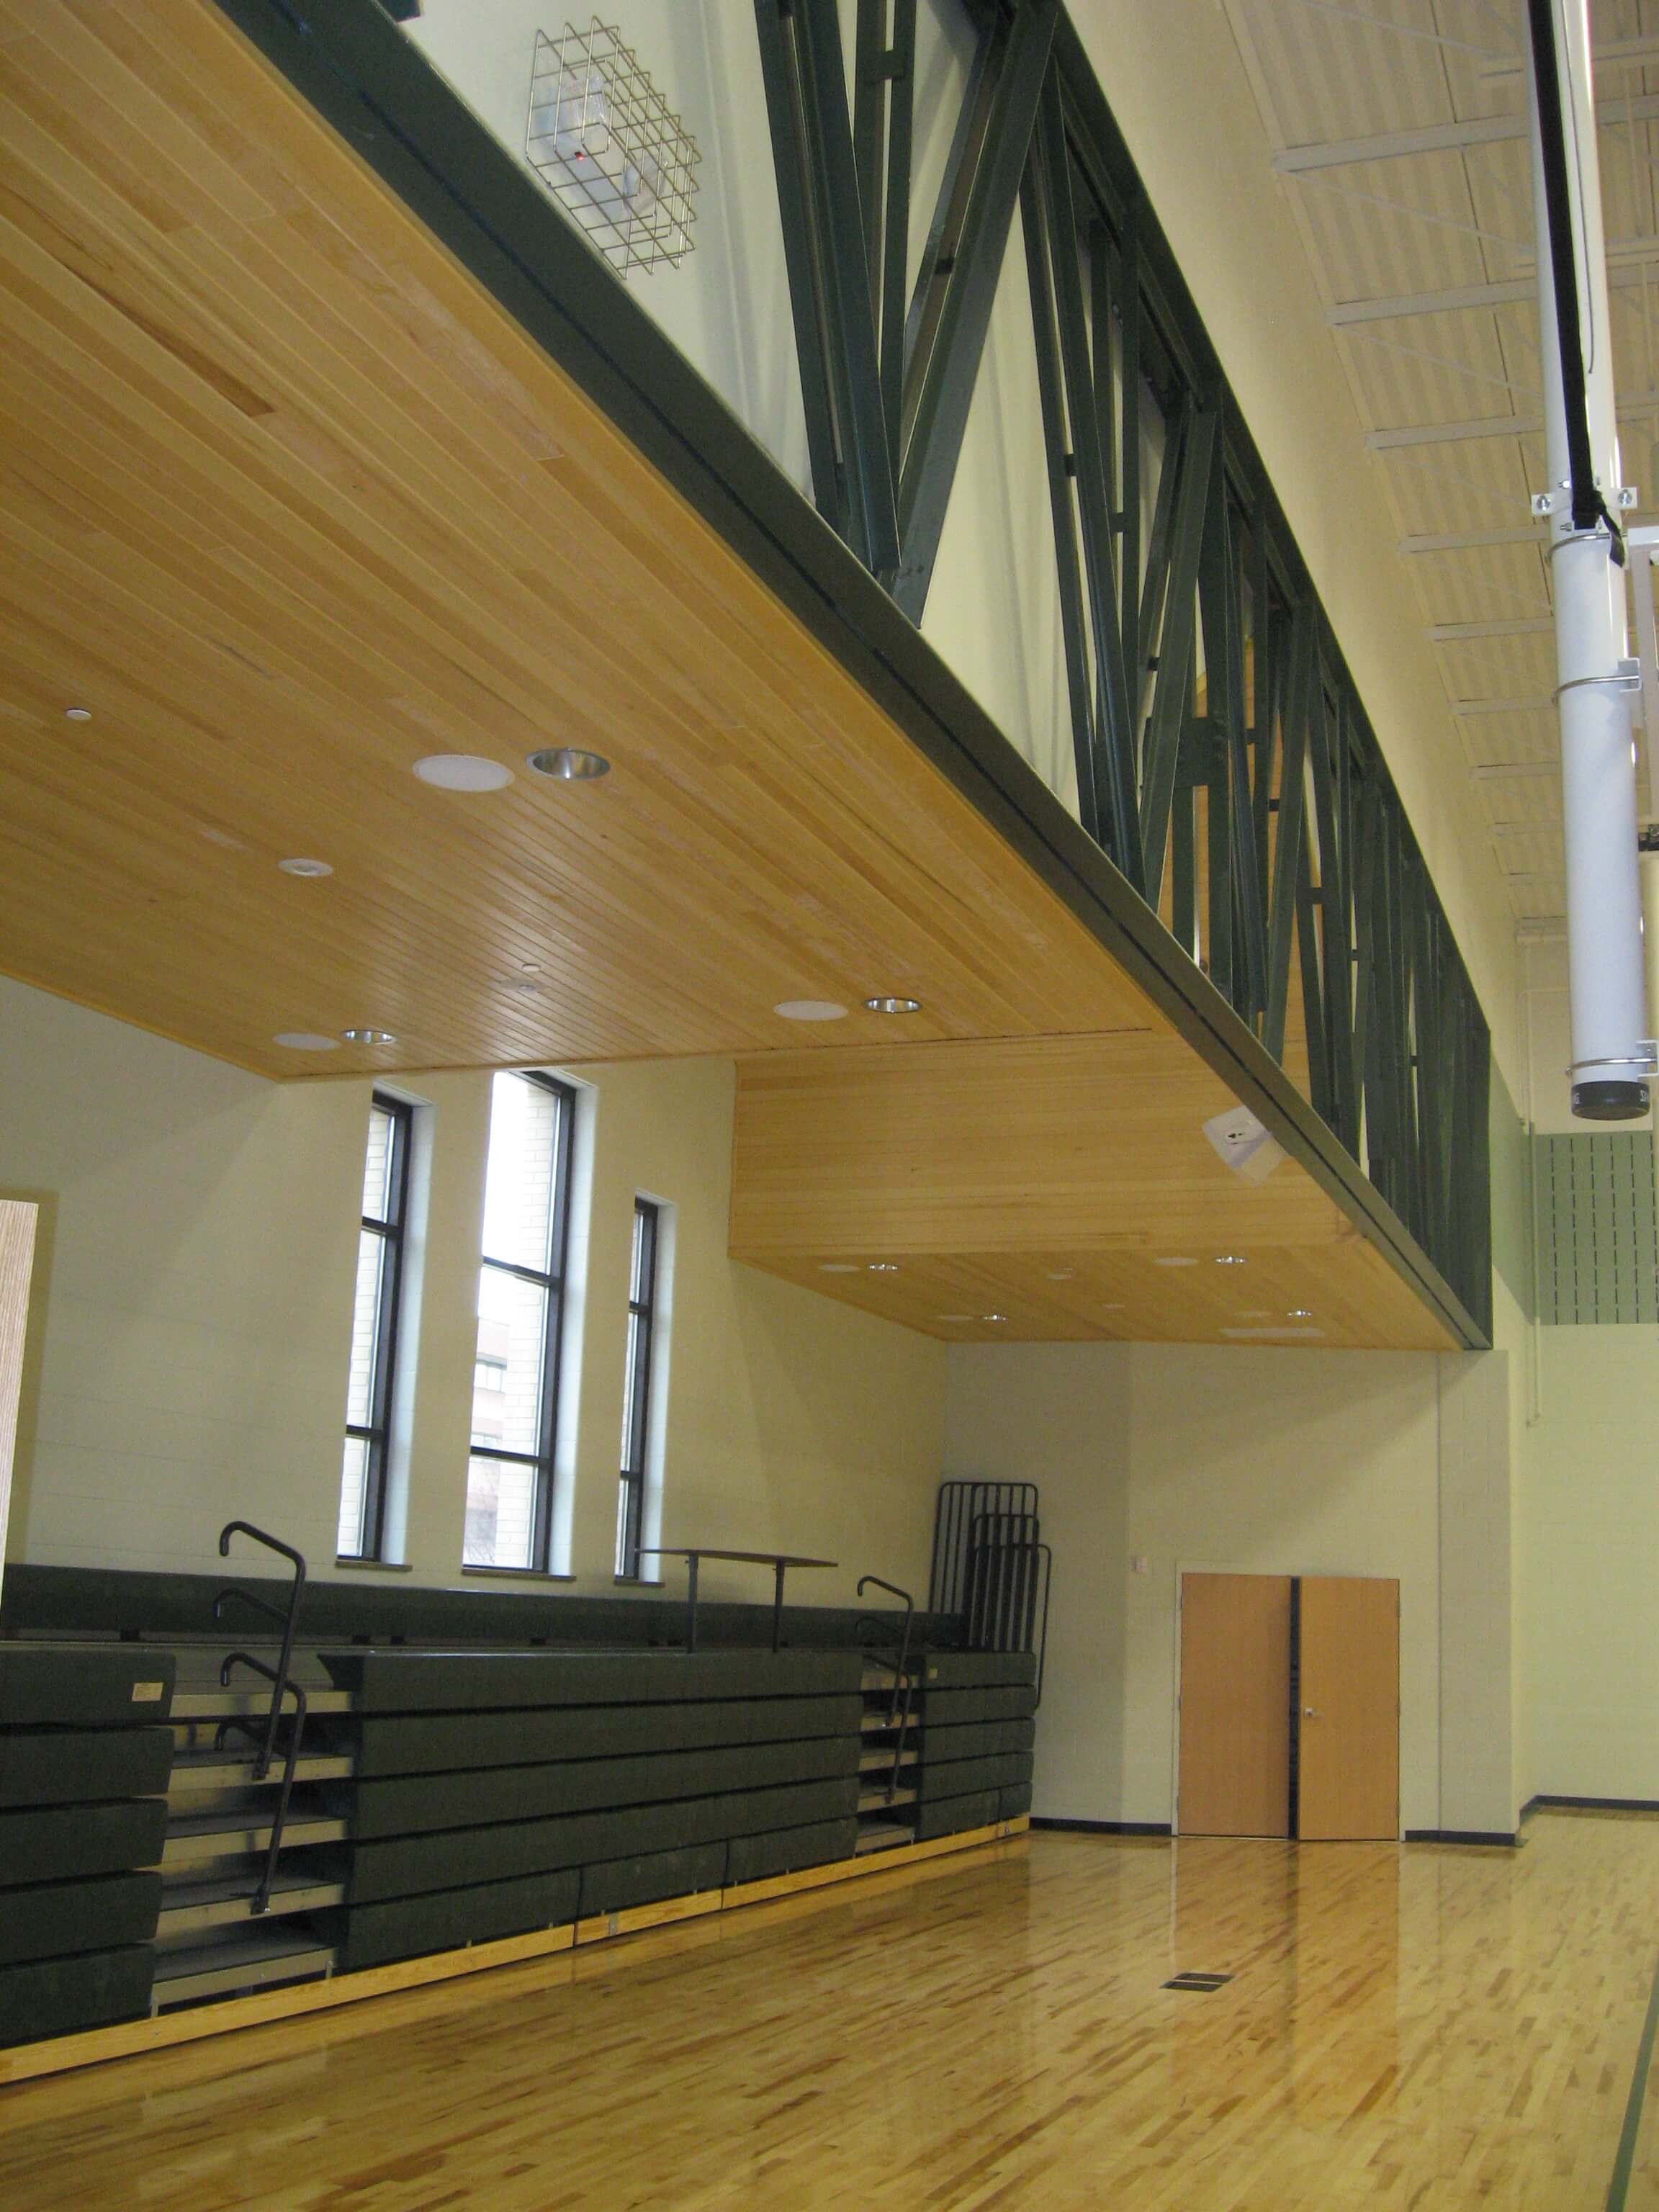 A large gym with wooden floors and walls.